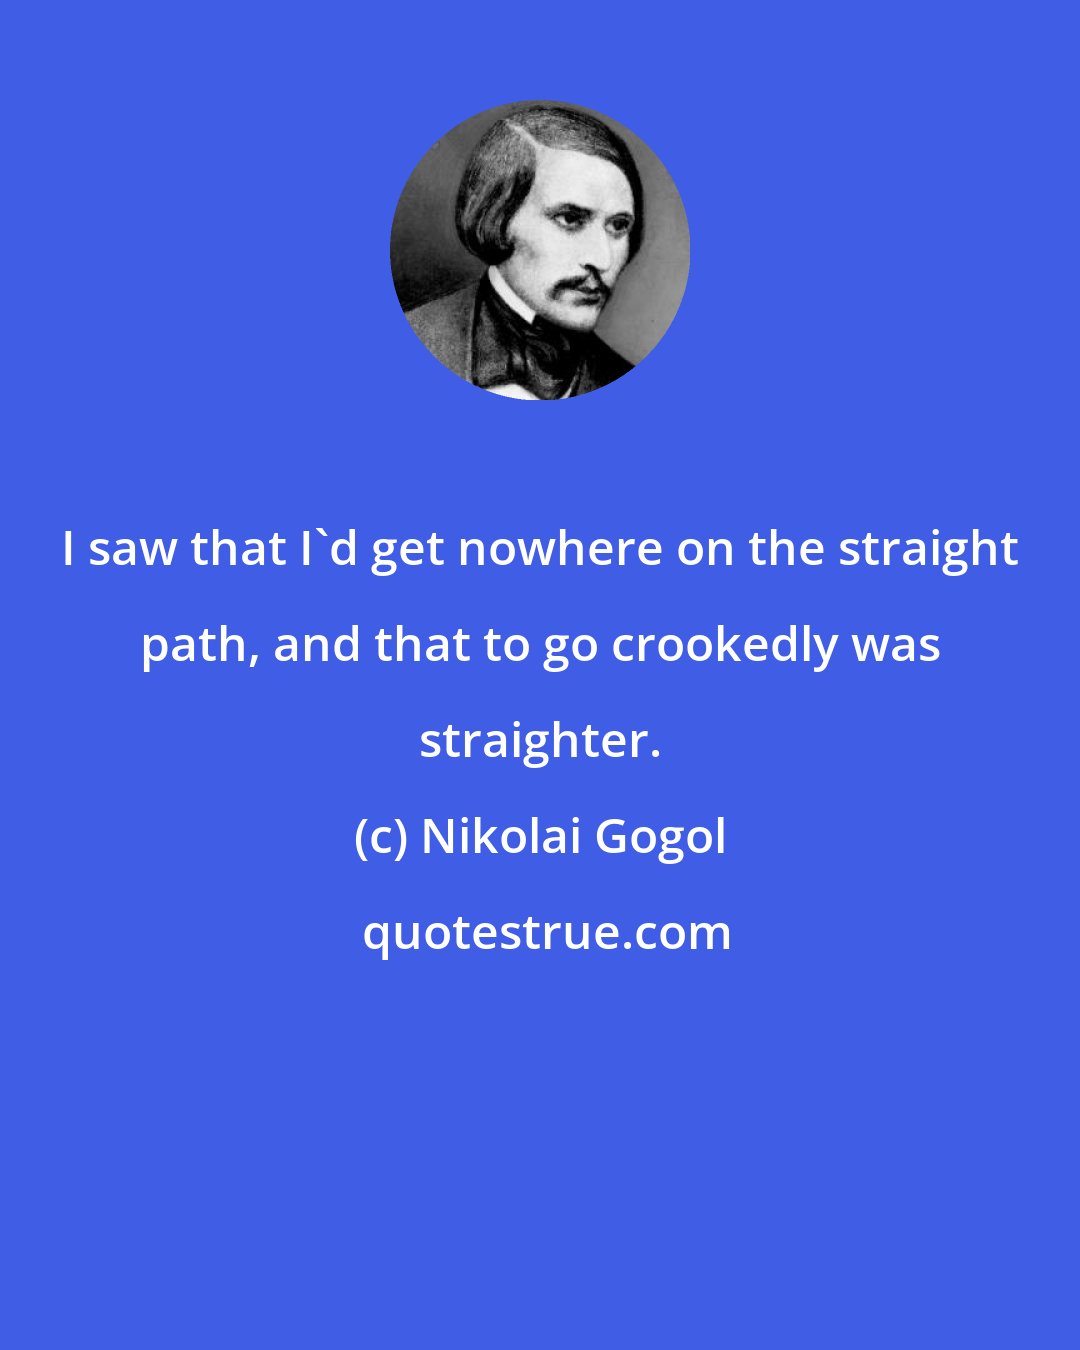 Nikolai Gogol: I saw that I'd get nowhere on the straight path, and that to go crookedly was straighter.